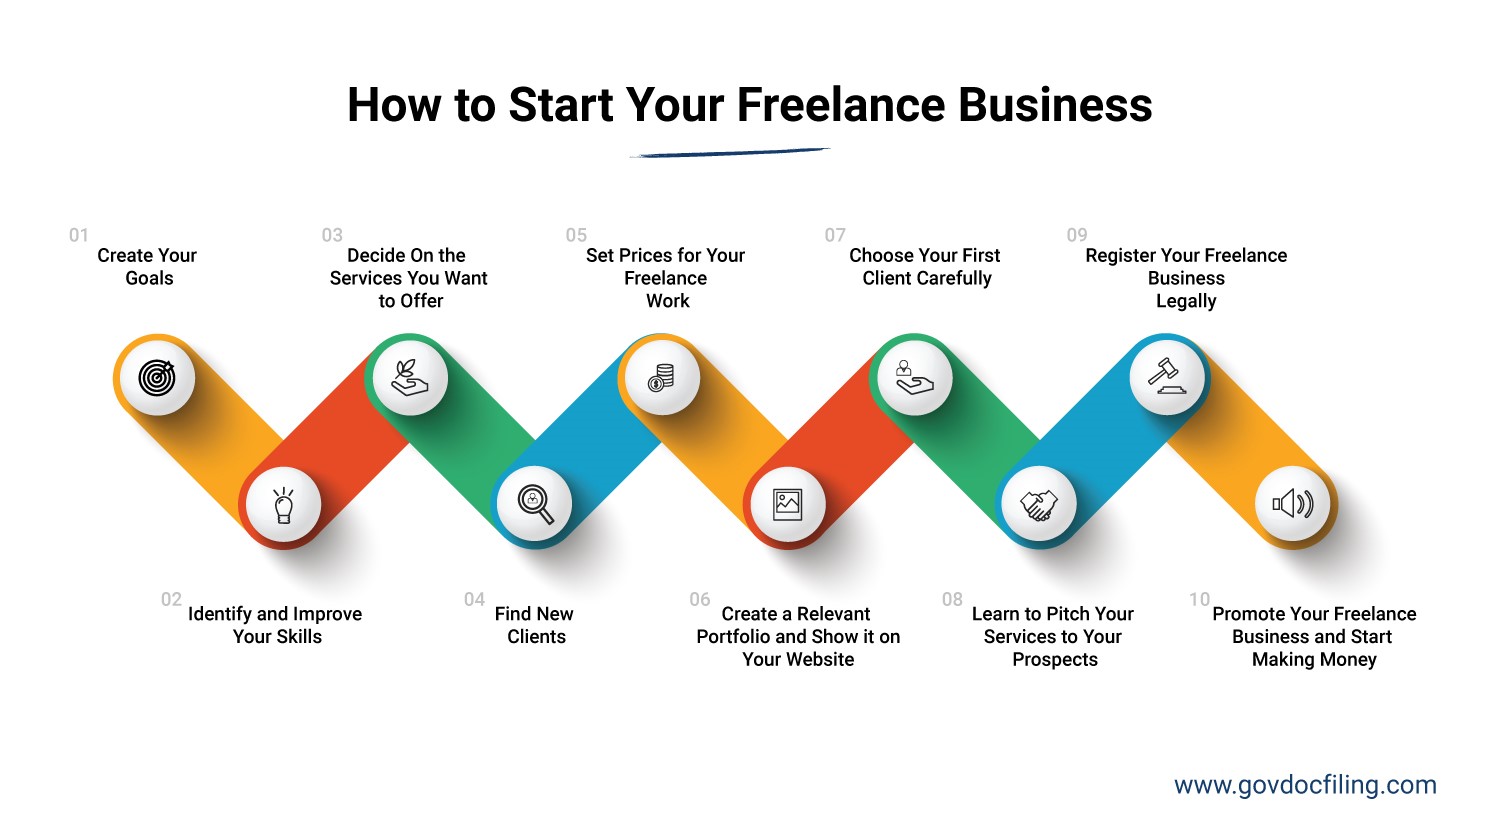 How to Start Your Freelance Business